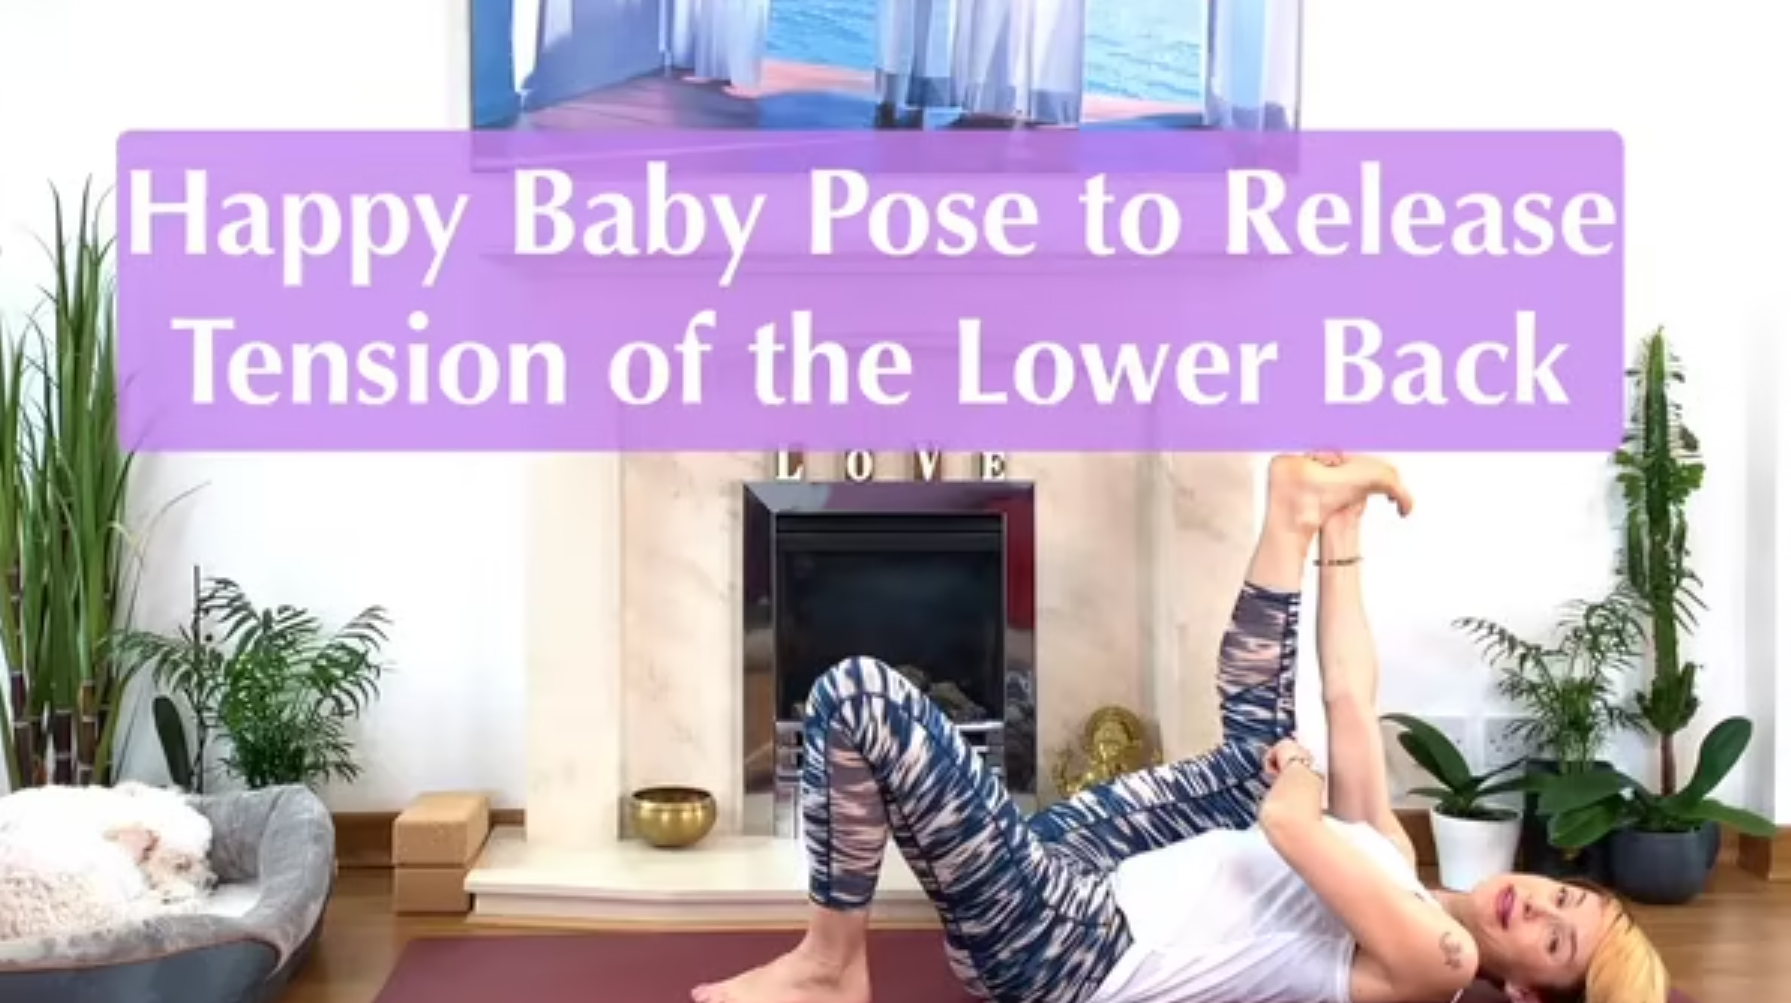 Olga Oakenfold - Happy Baby Pose to Release Tension of the Lower Back